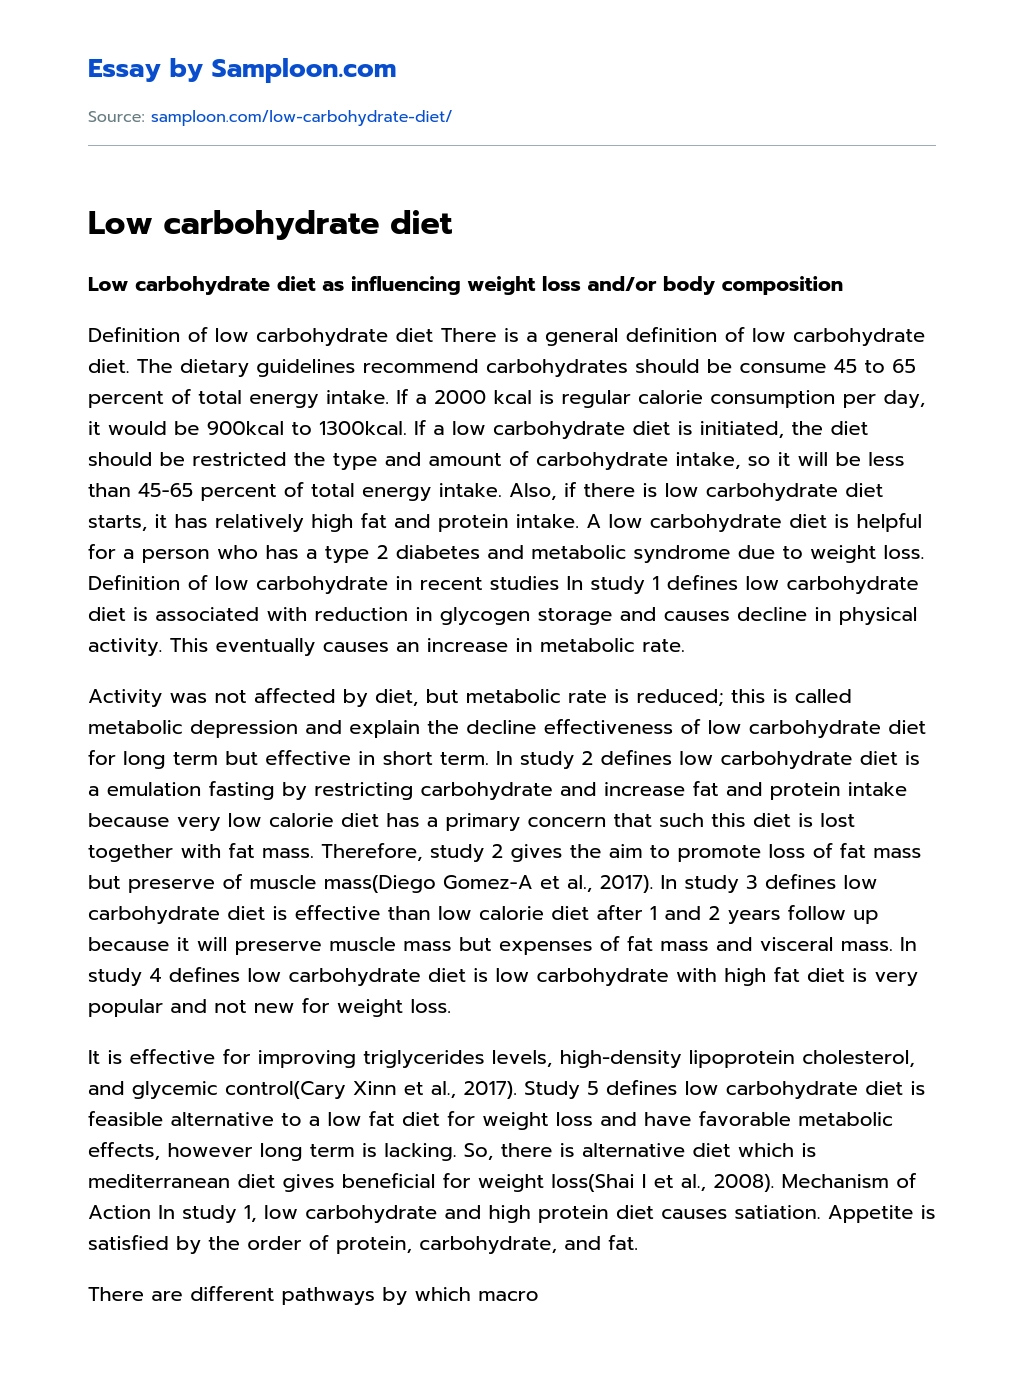 Low carbohydrate diet essay